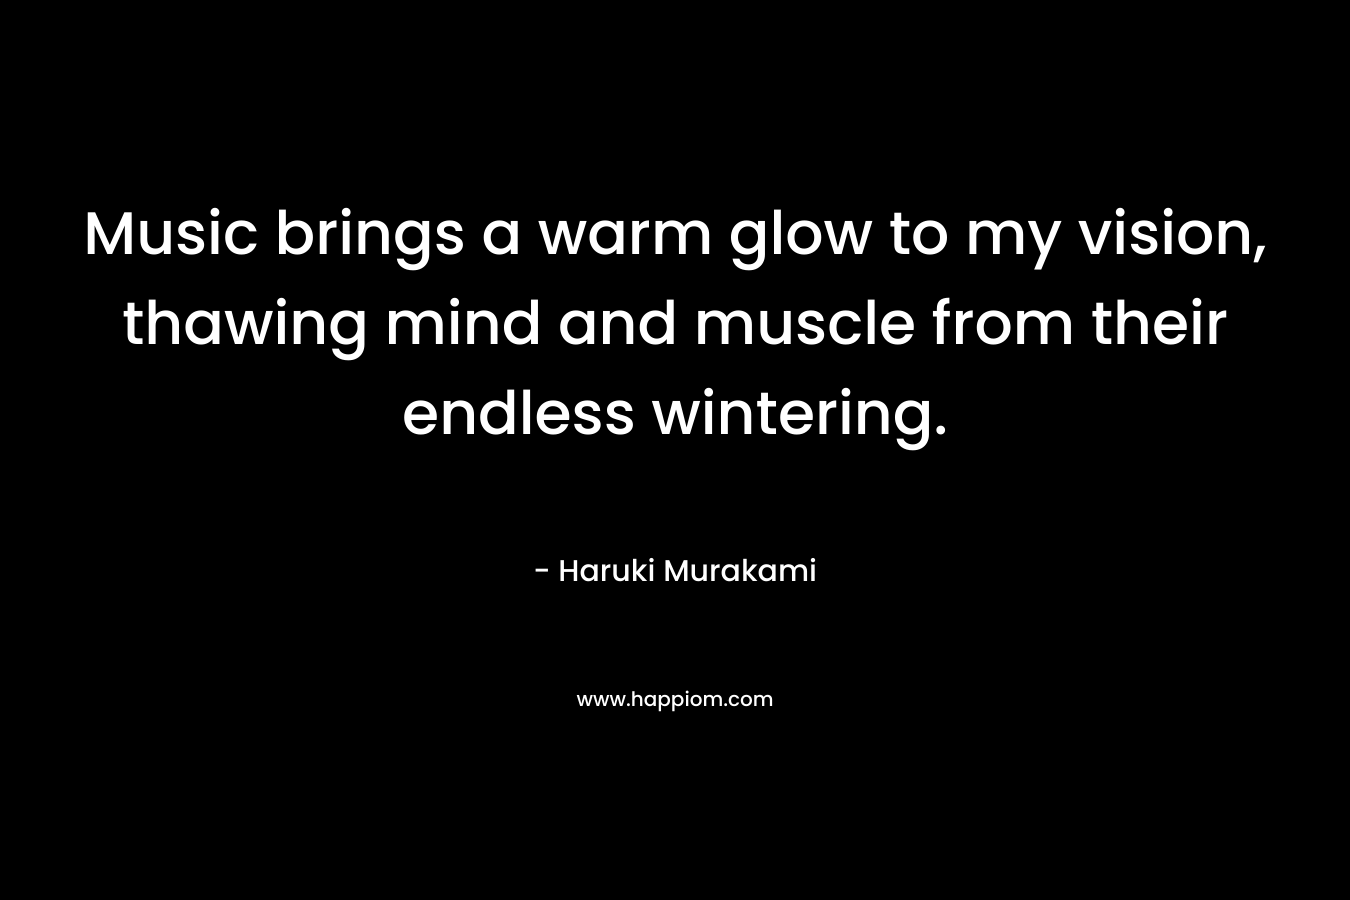 Music brings a warm glow to my vision, thawing mind and muscle from their endless wintering.